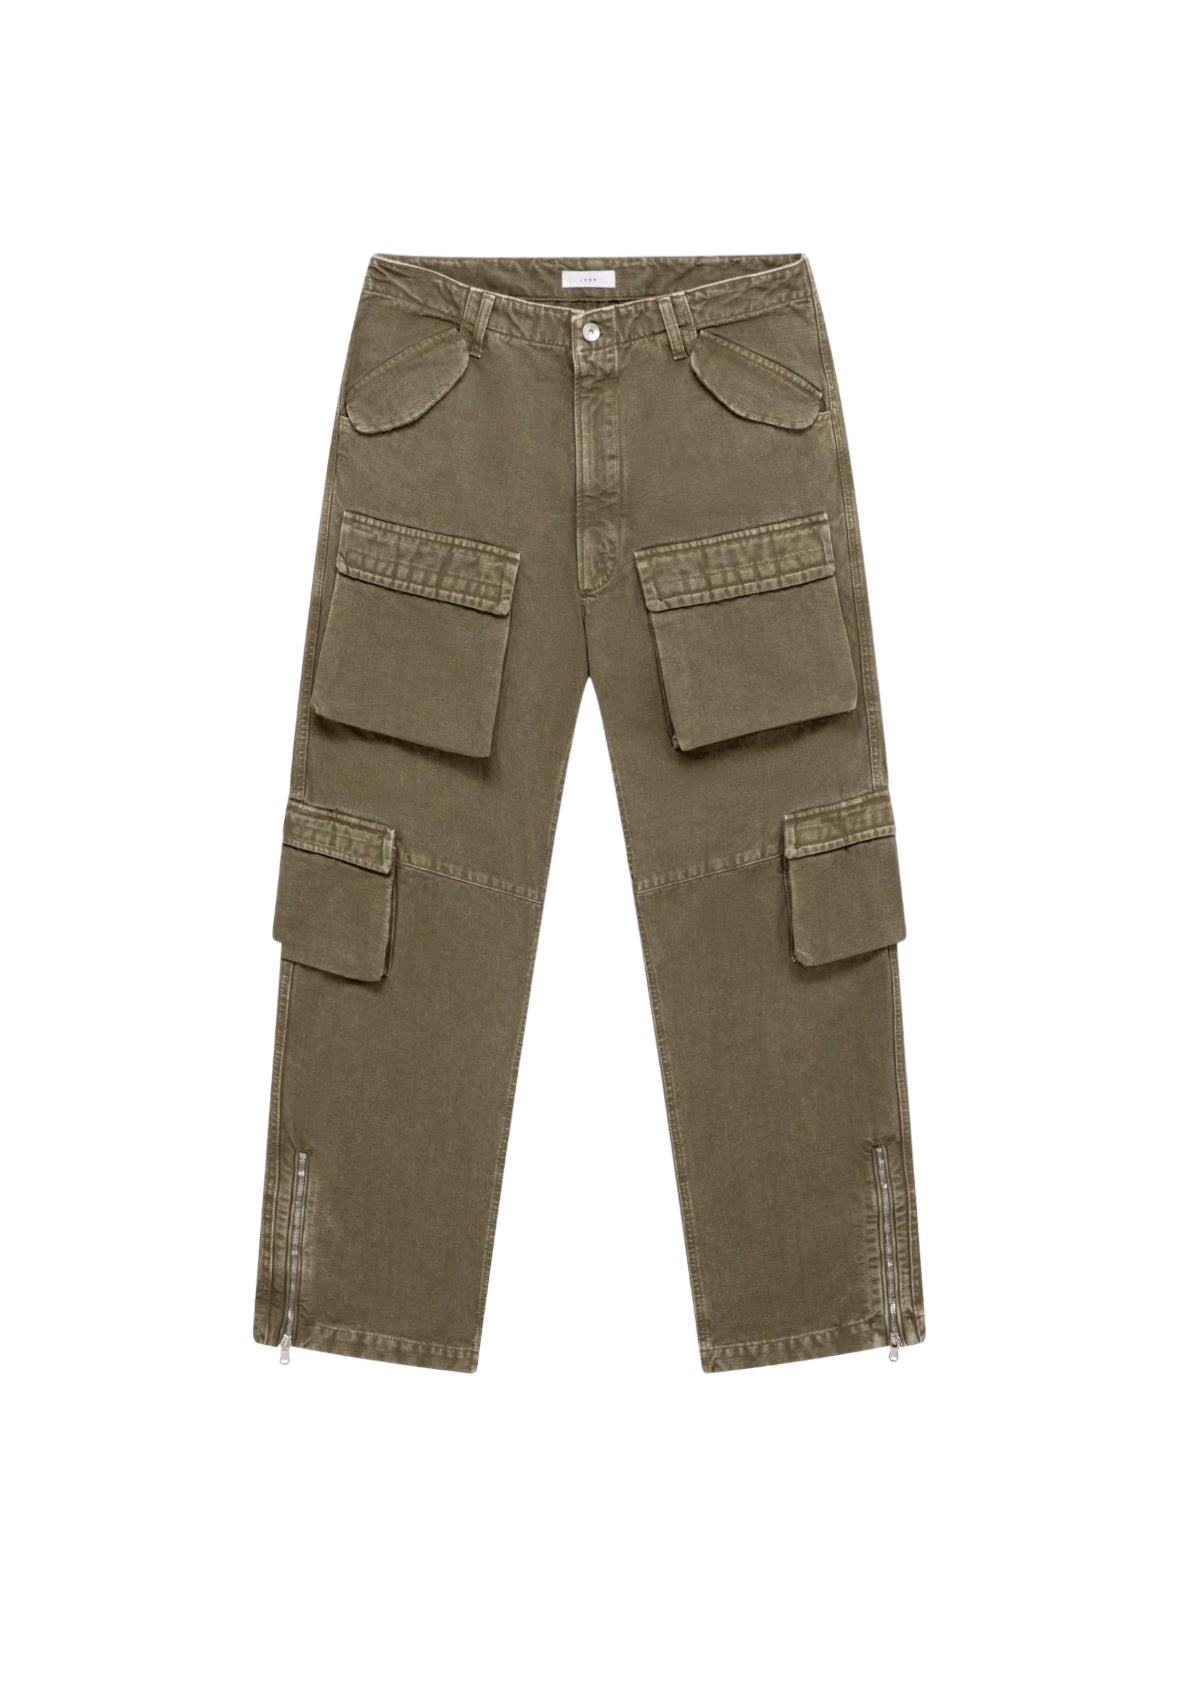 Training Cargo Pants in Military Green – www.manifest.us